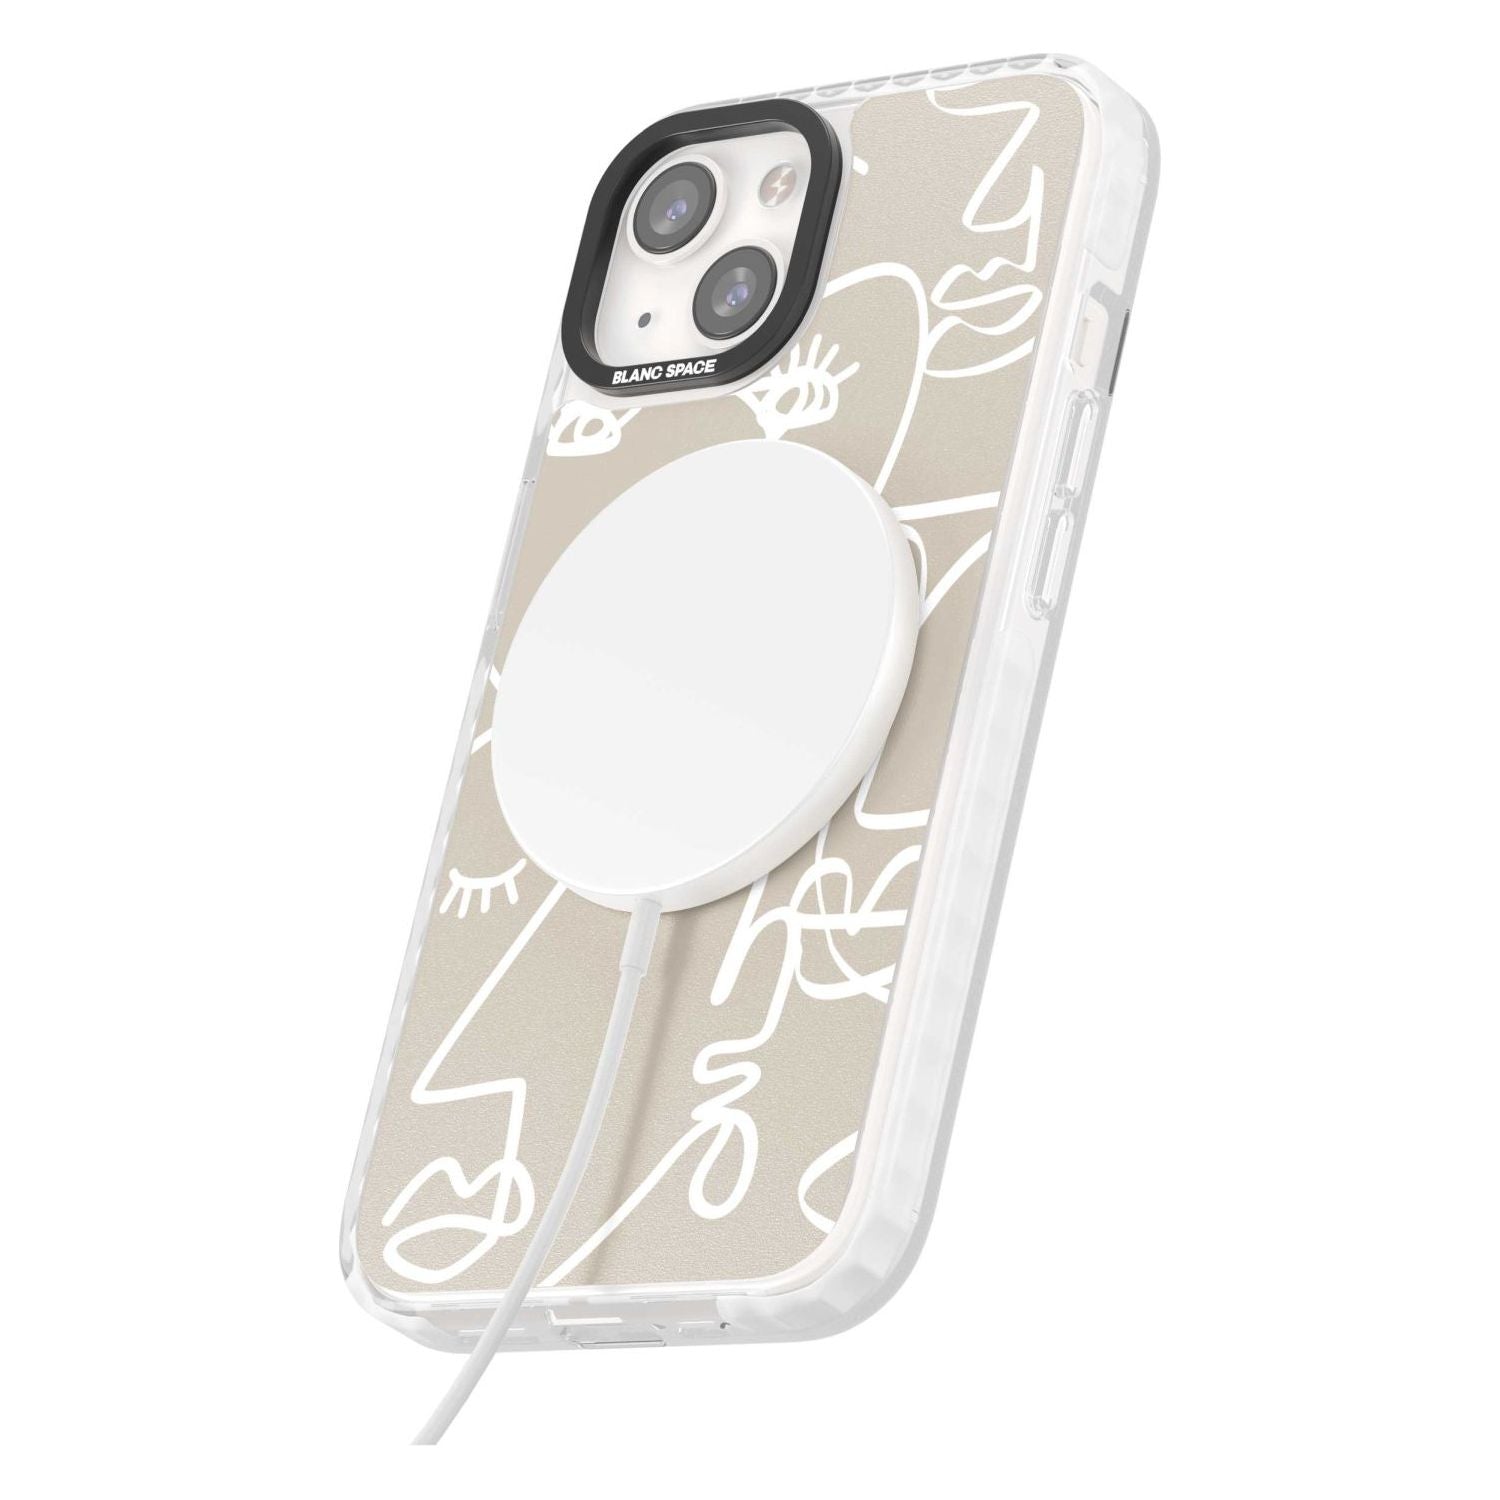 Abstract Continuous Line Faces White on Beige Phone Case iPhone 15 Pro Max / Black Impact Case,iPhone 15 Plus / Black Impact Case,iPhone 15 Pro / Black Impact Case,iPhone 15 / Black Impact Case,iPhone 15 Pro Max / Impact Case,iPhone 15 Plus / Impact Case,iPhone 15 Pro / Impact Case,iPhone 15 / Impact Case,iPhone 15 Pro Max / Magsafe Black Impact Case,iPhone 15 Plus / Magsafe Black Impact Case,iPhone 15 Pro / Magsafe Black Impact Case,iPhone 15 / Magsafe Black Impact Case,iPhone 14 Pro Max / Black Impact Cas